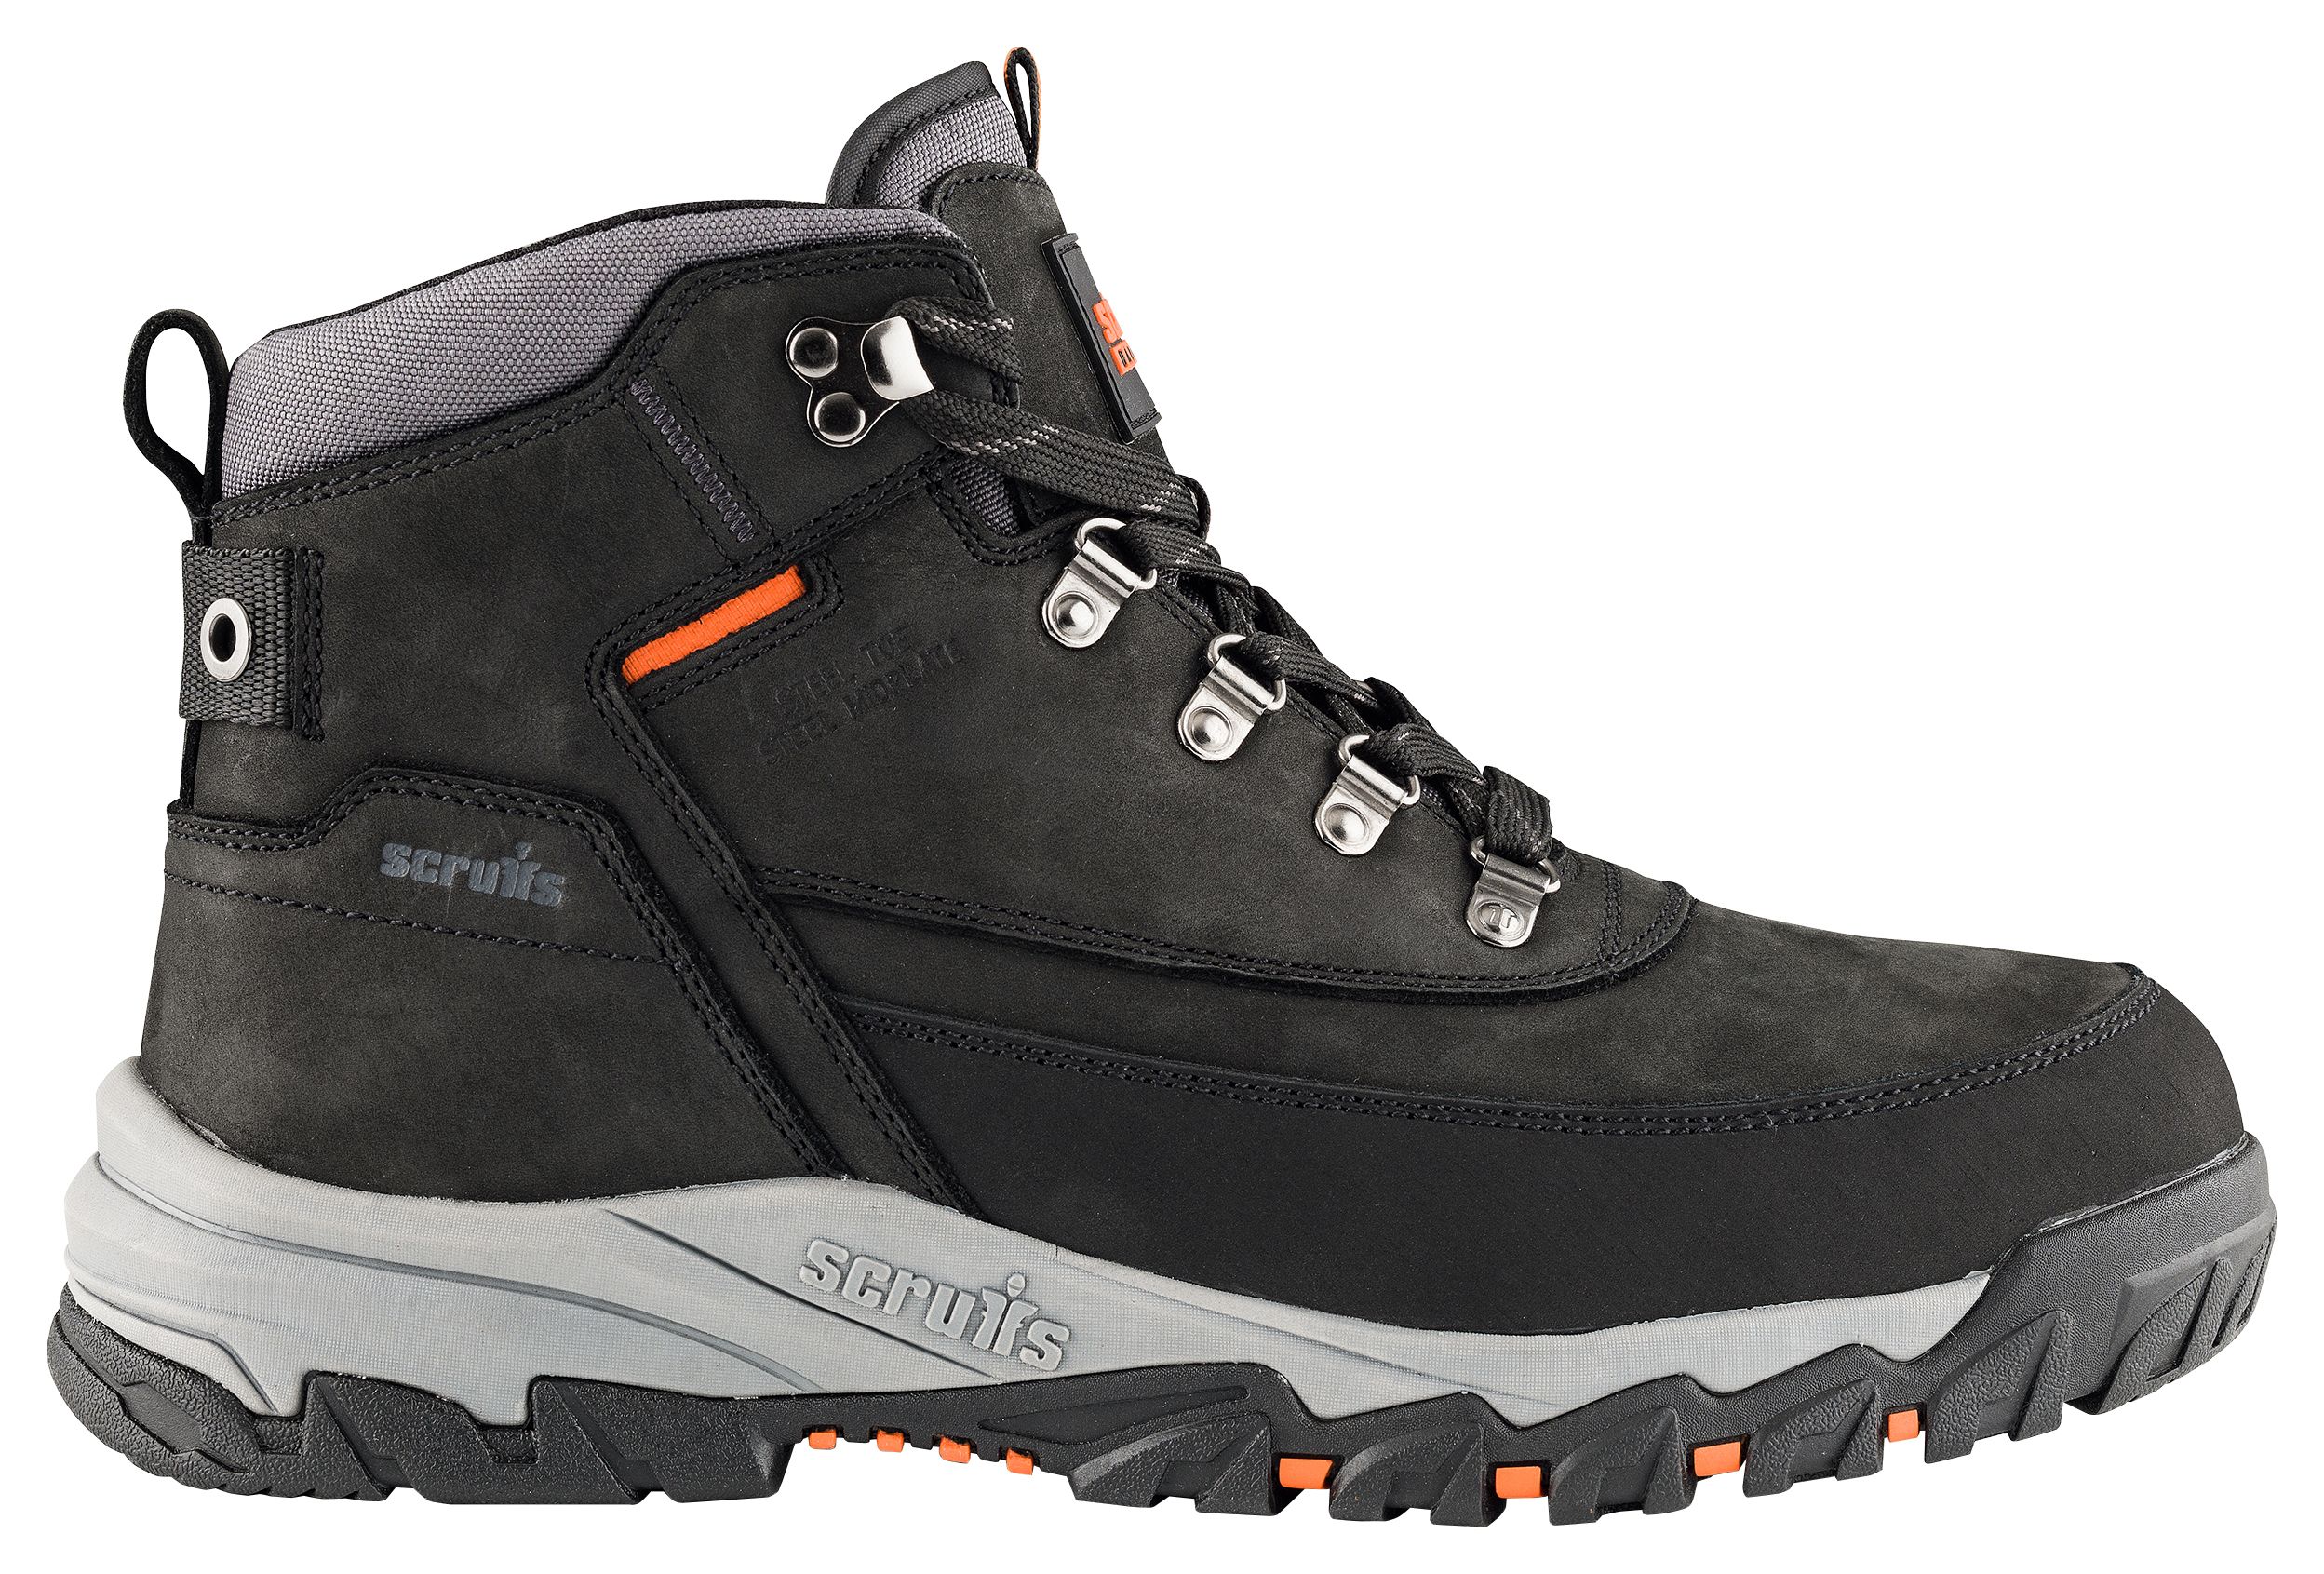 Image of Scruffs Scarfell Safety Boots - Black Size 10